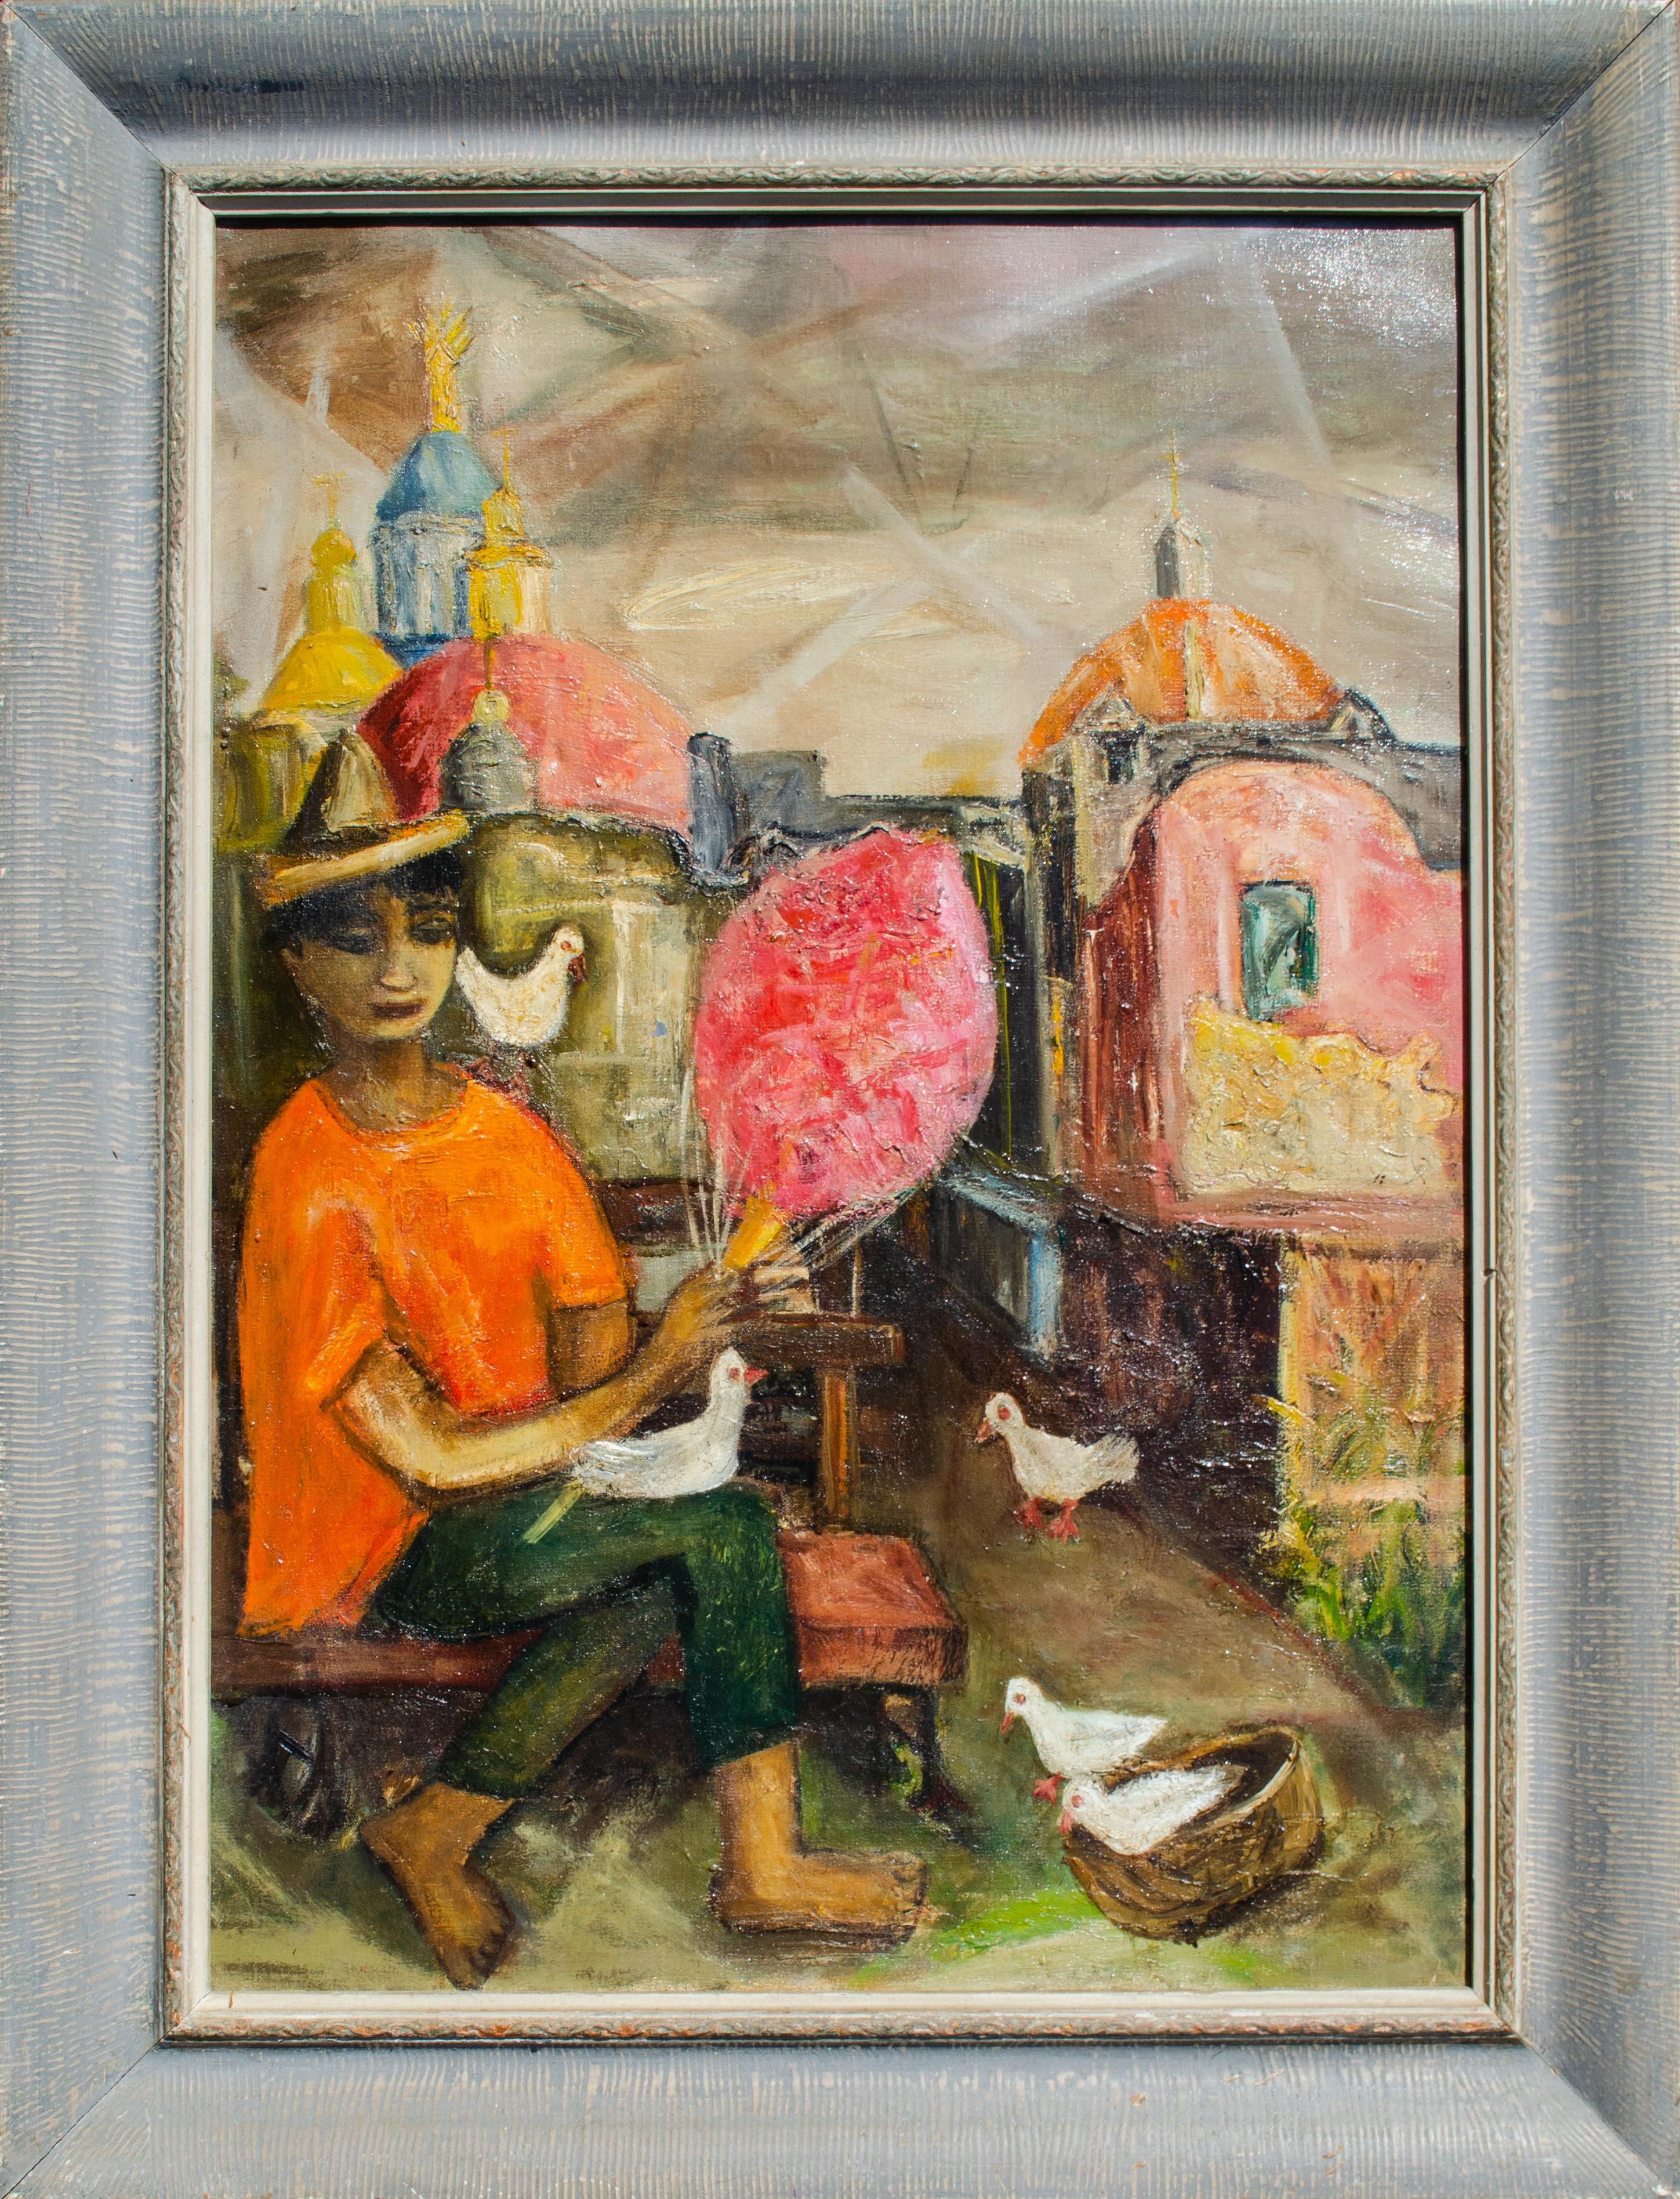 Mildred Simonson (American, 1898-1997)
Untitled, c. 1950s
Oil on canvas
27 3/4 x 20 in.
Framed: 37 3/4 x 31 5/8 x 1 1/2 in.
Signed verso on stretcher bar

A resident of New York, Mildred Simonson exhibited her paintings and sculpture regularly in